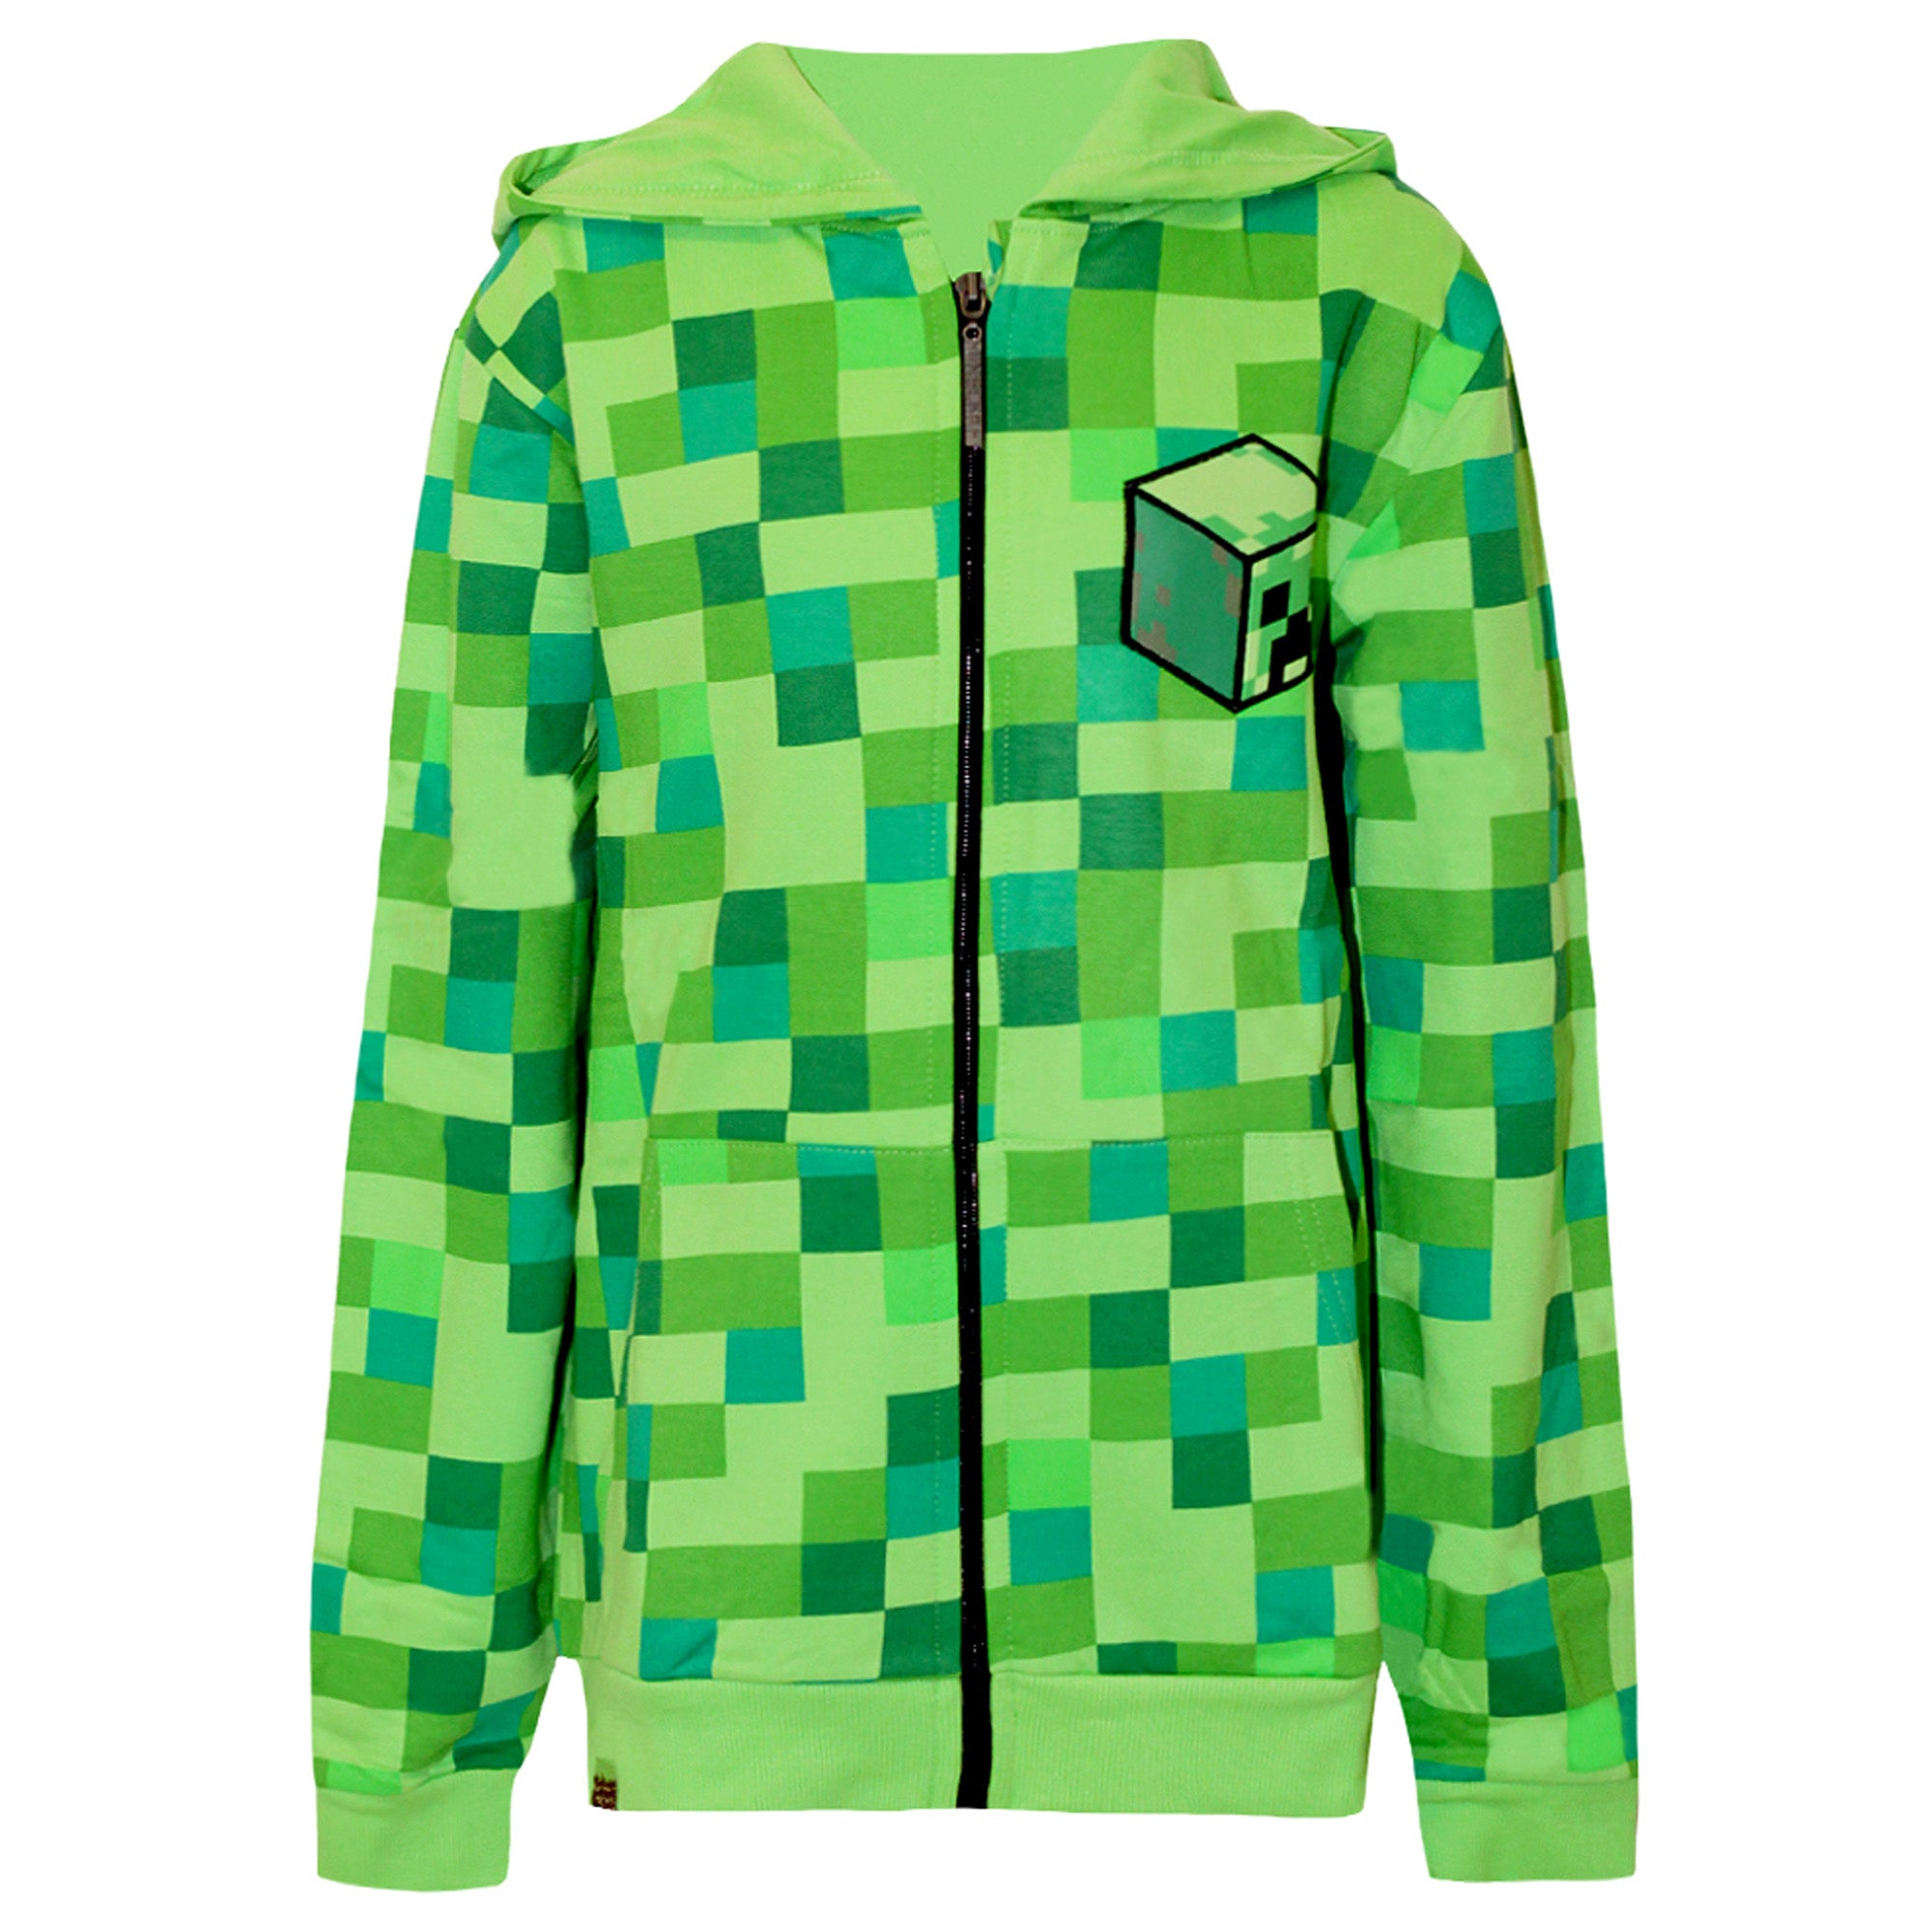 Minecraft Childrens/Boys Creeper Character Hoodie